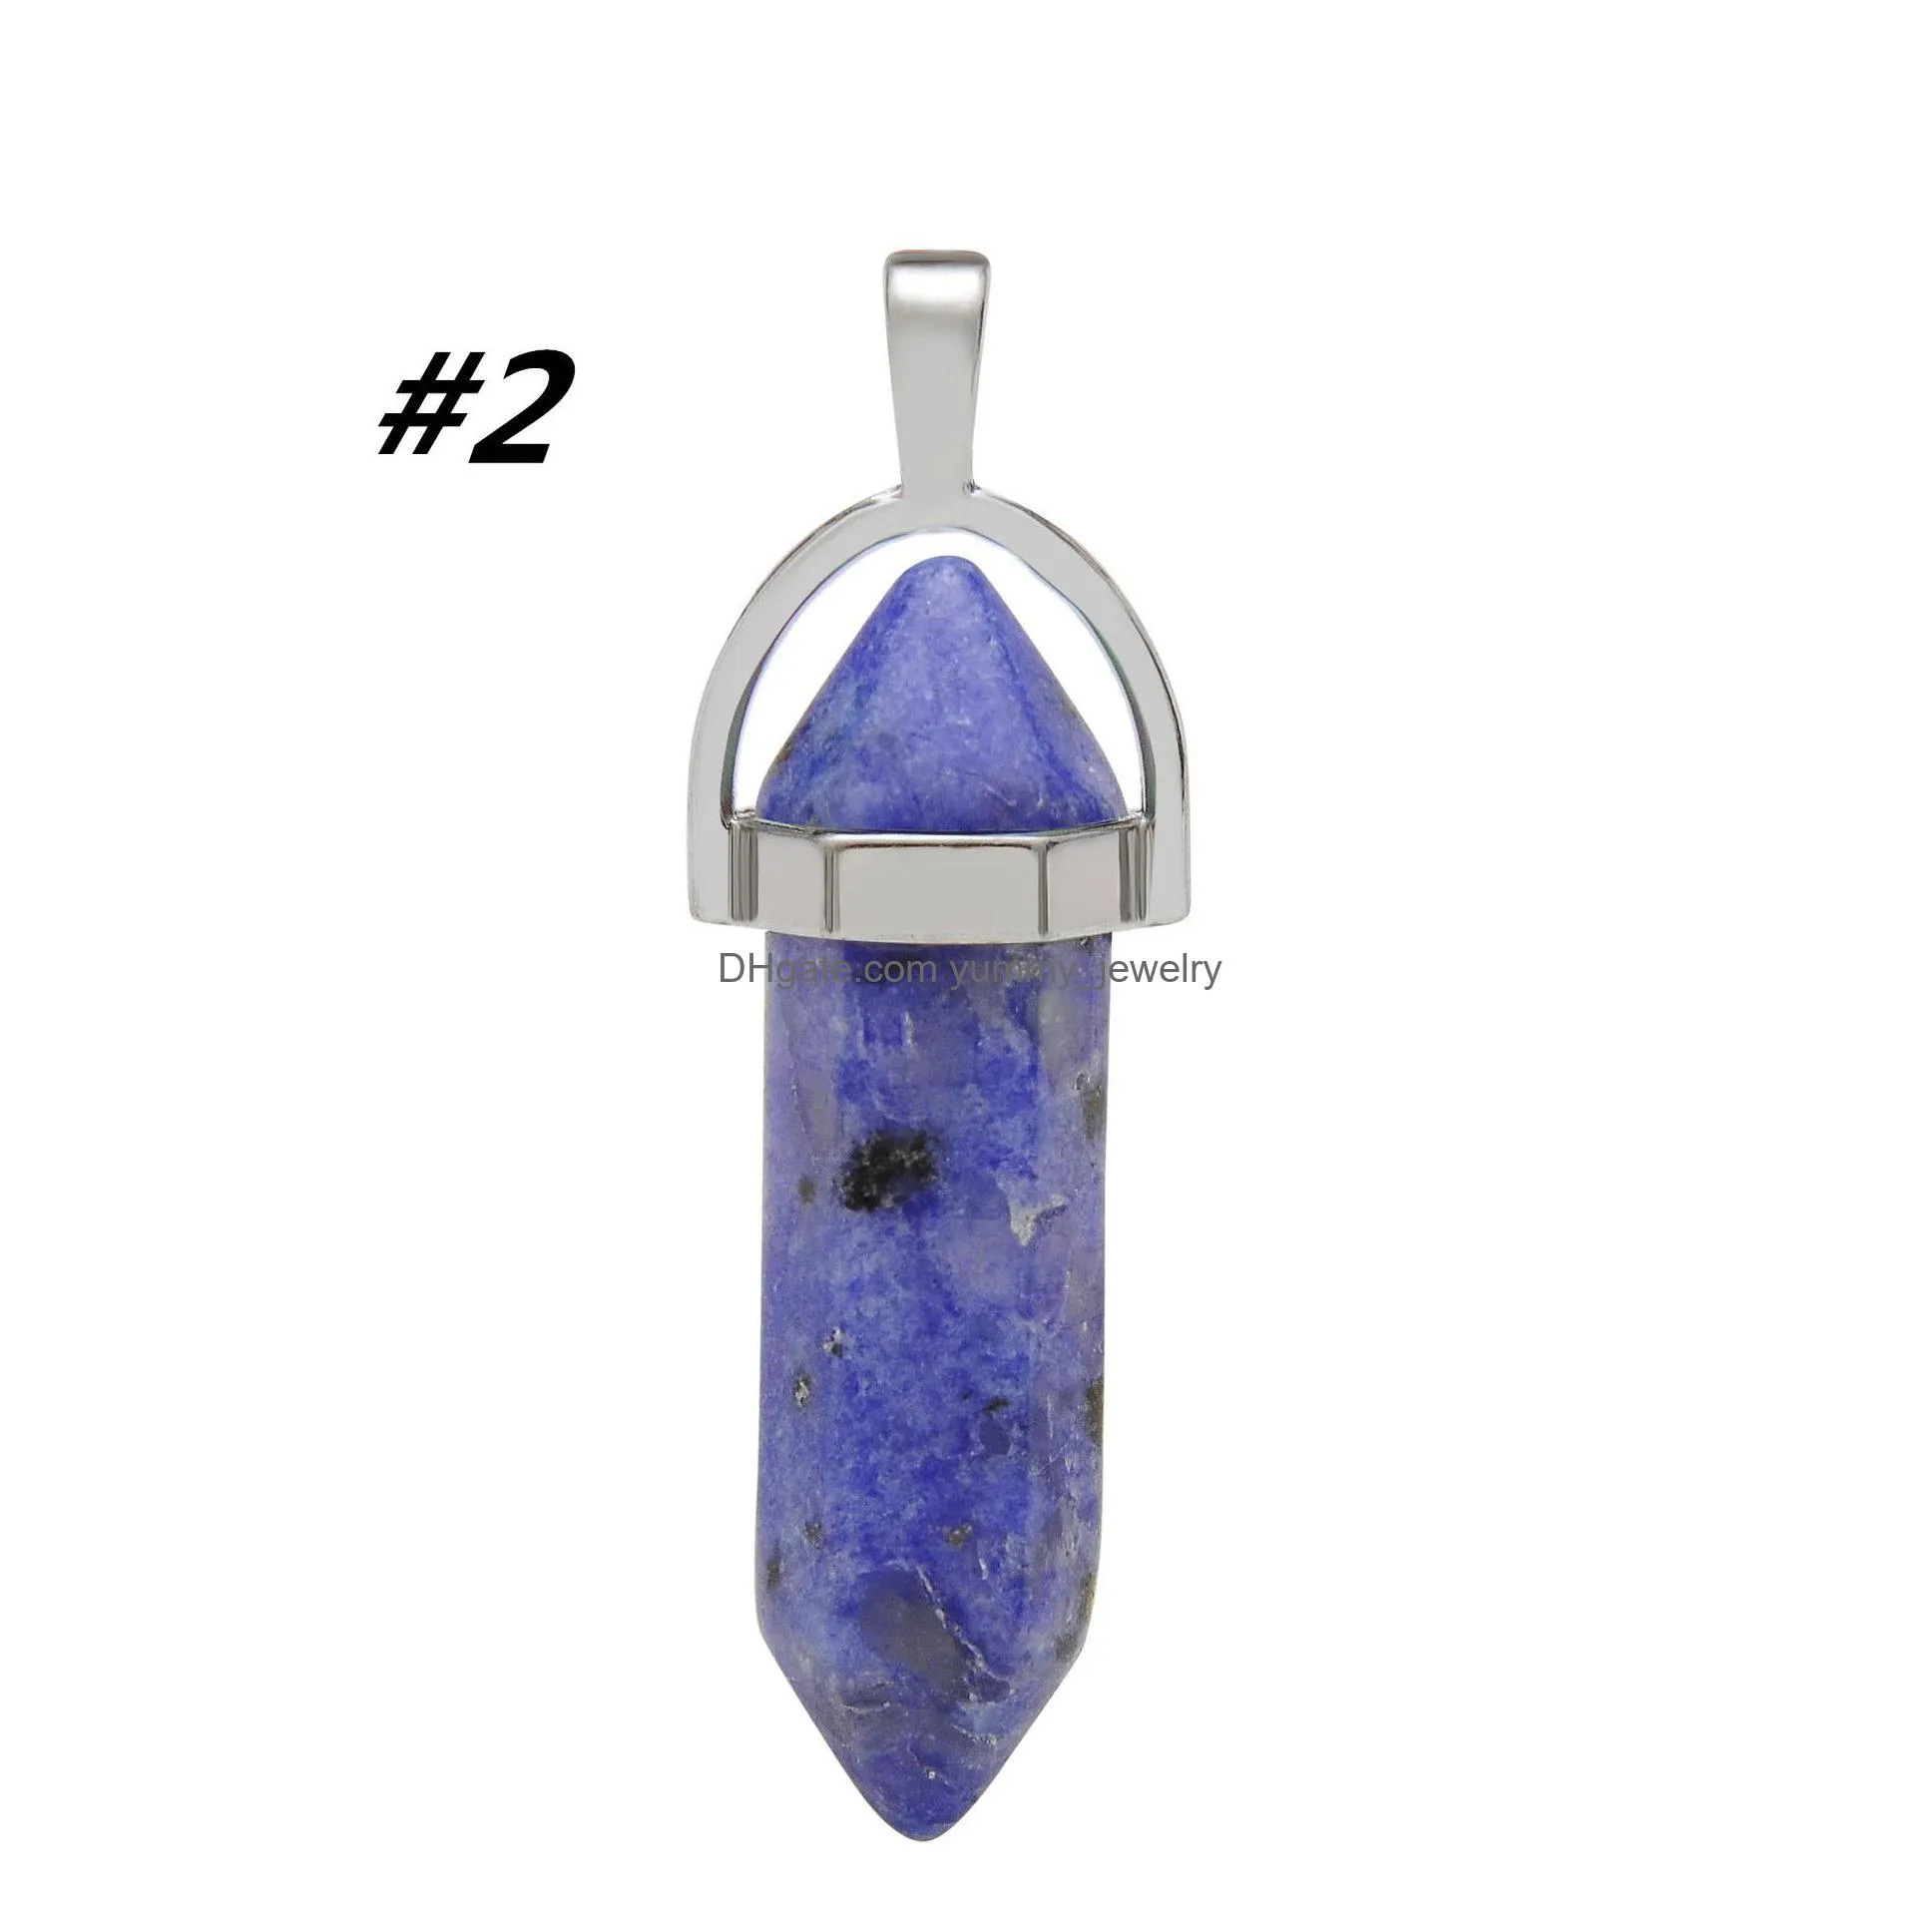 Pendant Necklaces Luxury Natural Quartz Stone Necklaces Crystal Hexagonal Prism Point Pendant With Leather Rope Chains For Women Men F Dhx61